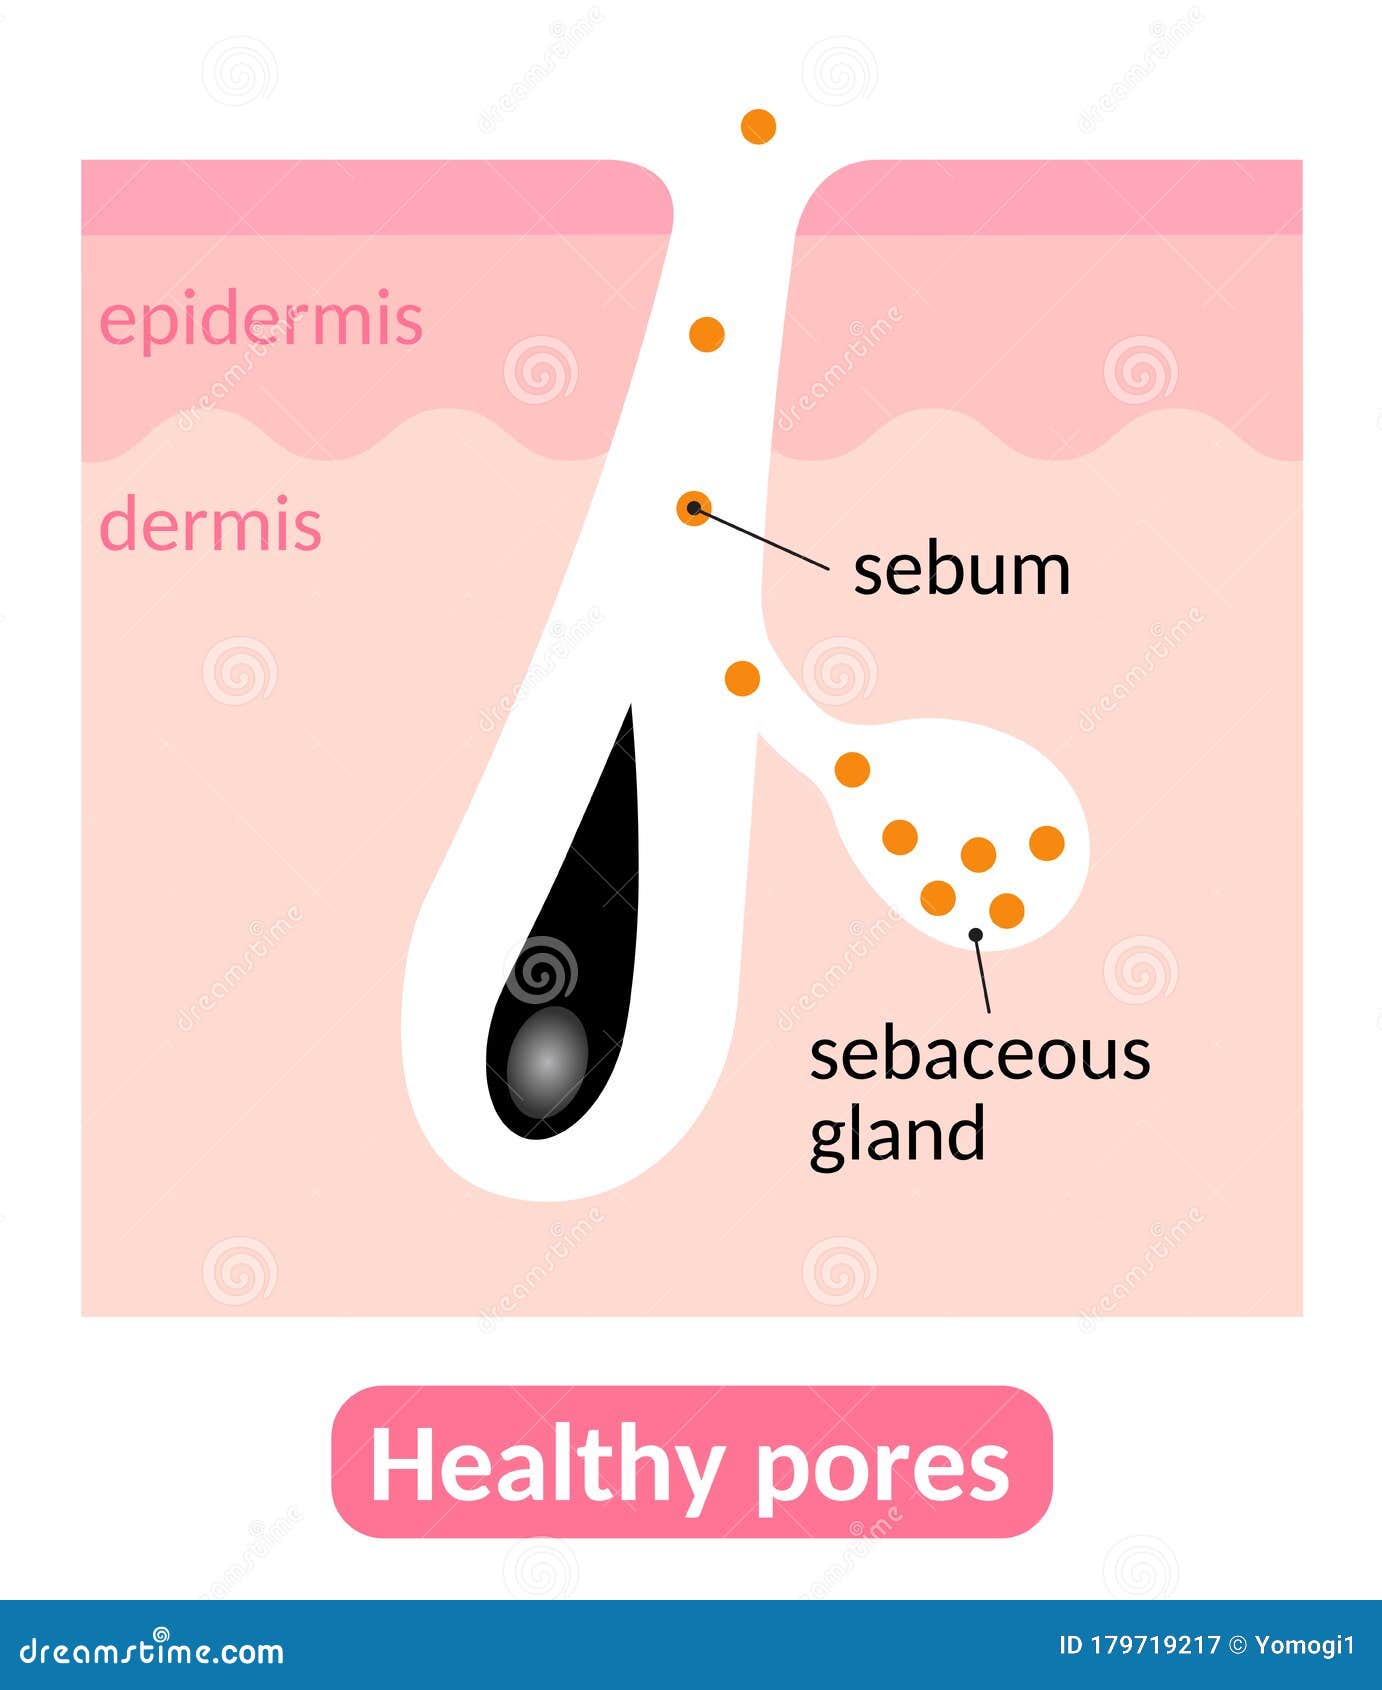 healthy pores and sebum. sebaceous glands produce right amount of sebum,which keeps the skin great condition. skin care concept